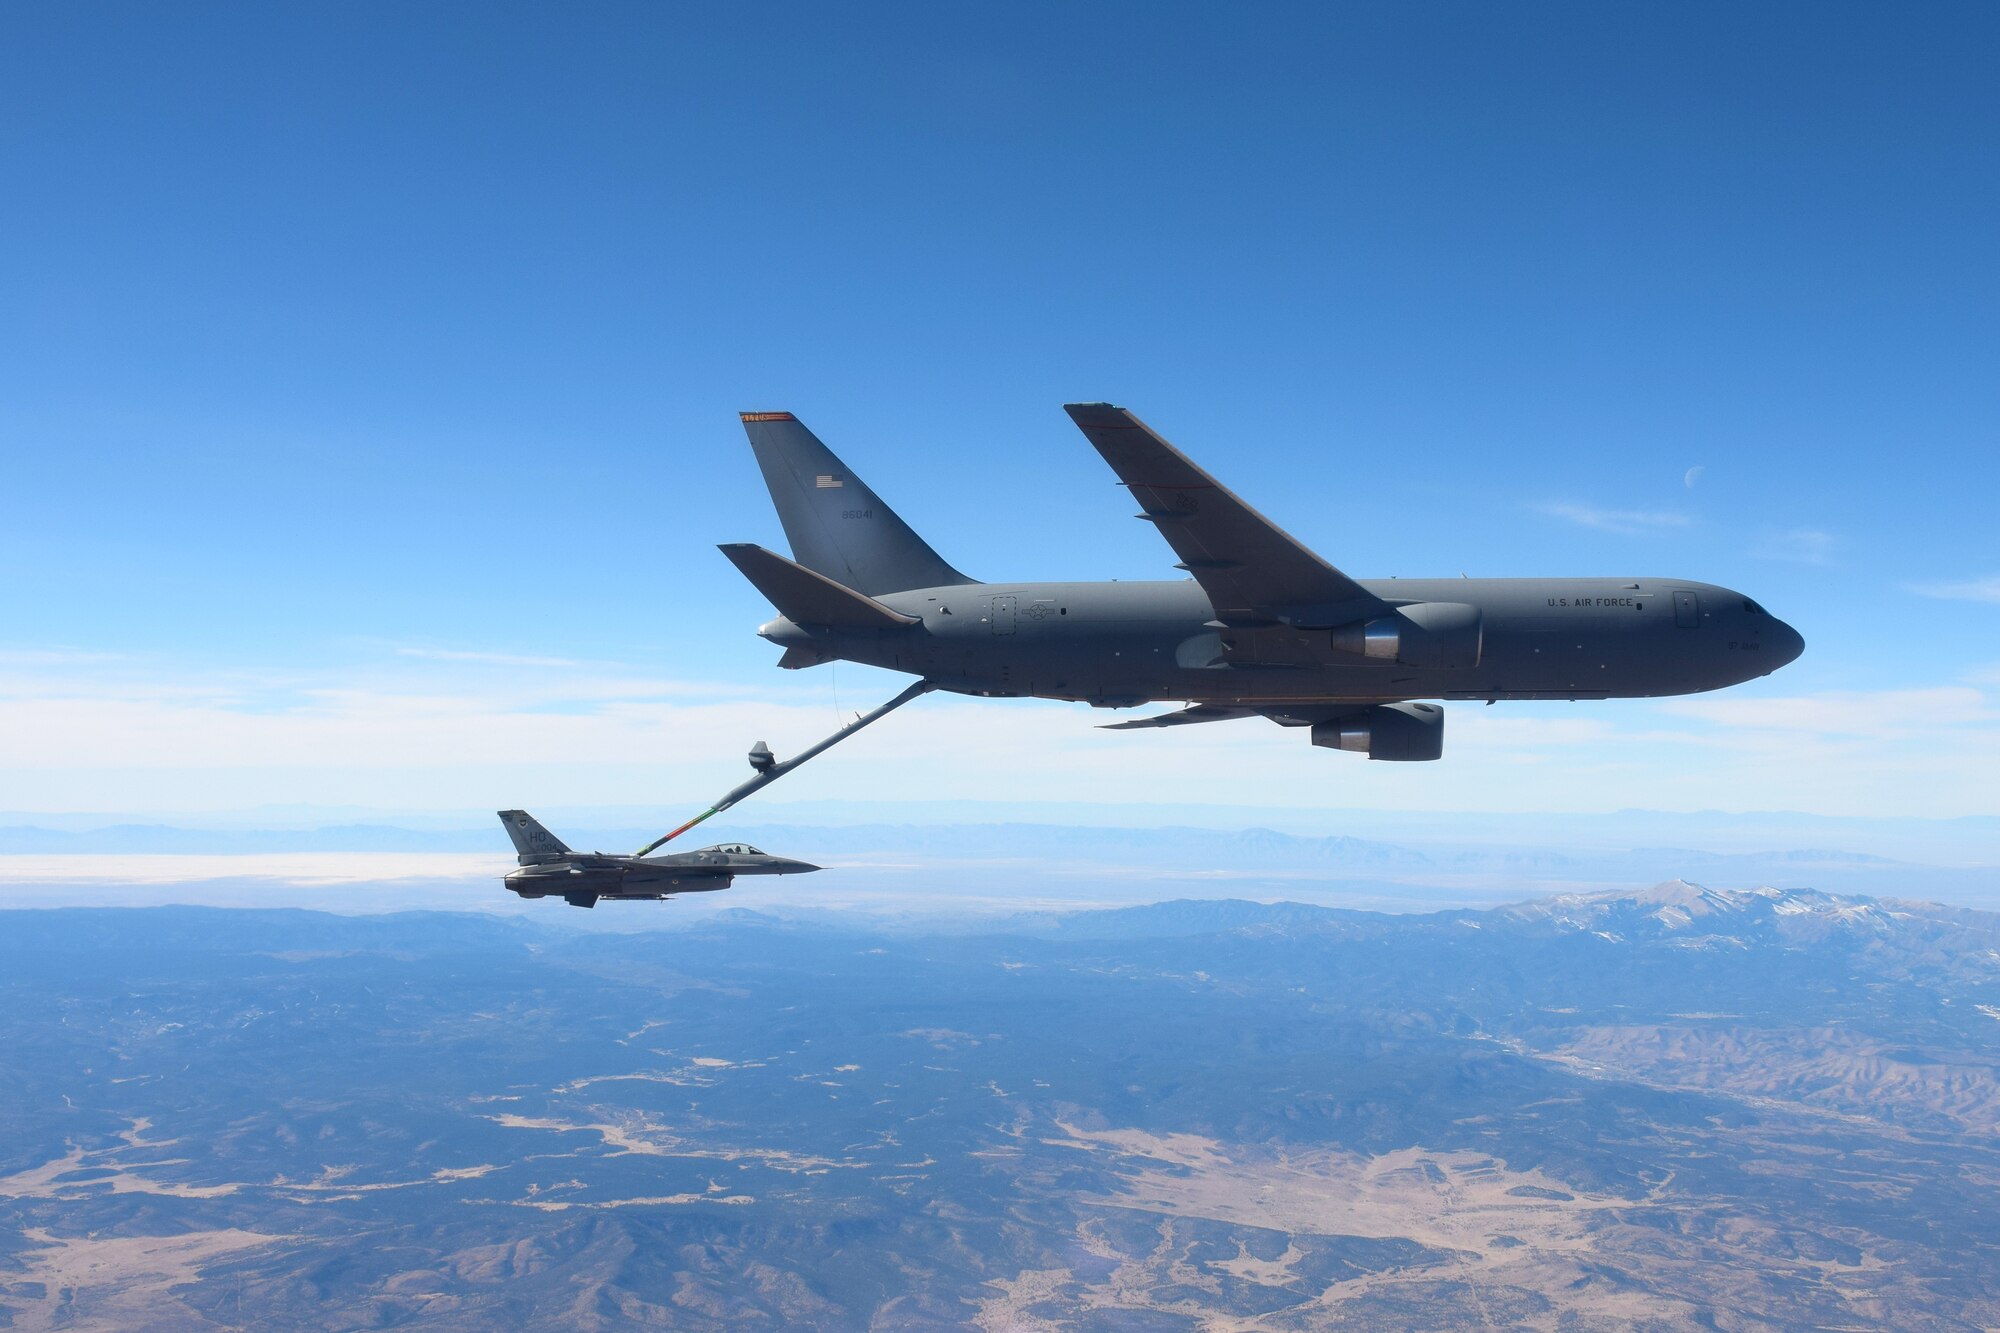 White Sands National Park can be seen in the distance at a KC-46 Pegasus from the 56th Air Refueling Squadron at Altus Air Force Base (AFB), Oklahoma, refuels an F-16 Fighting Falcon from the 49th Wing at Holloman AFB, New Mexico, December 7, 2020. Two KC-46s practiced air refueling operations over New Mexico with ten F-16s from Holloman AFB. (Courtesy photo by 1st Lt. Daniel Lee)